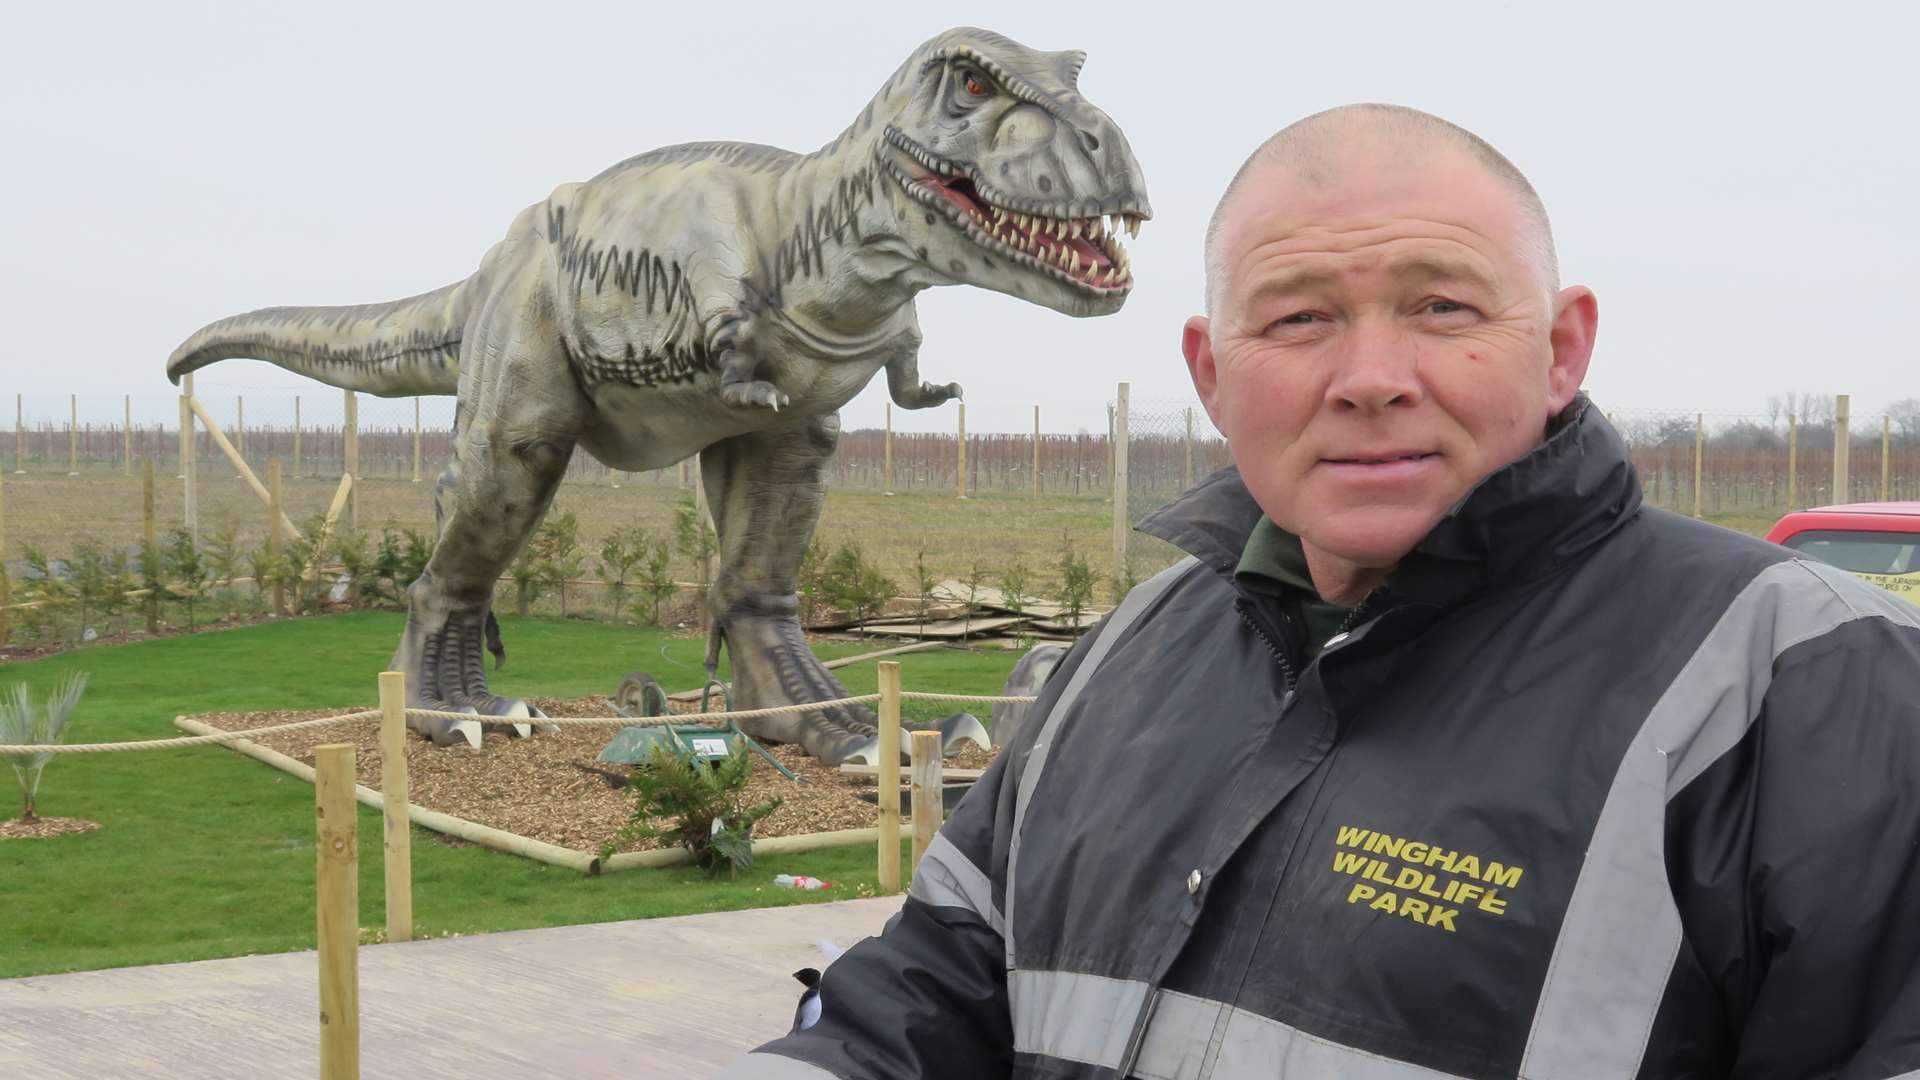 Wingham Wildlife Park owner Tony Binskin with the mighty T-Rex.